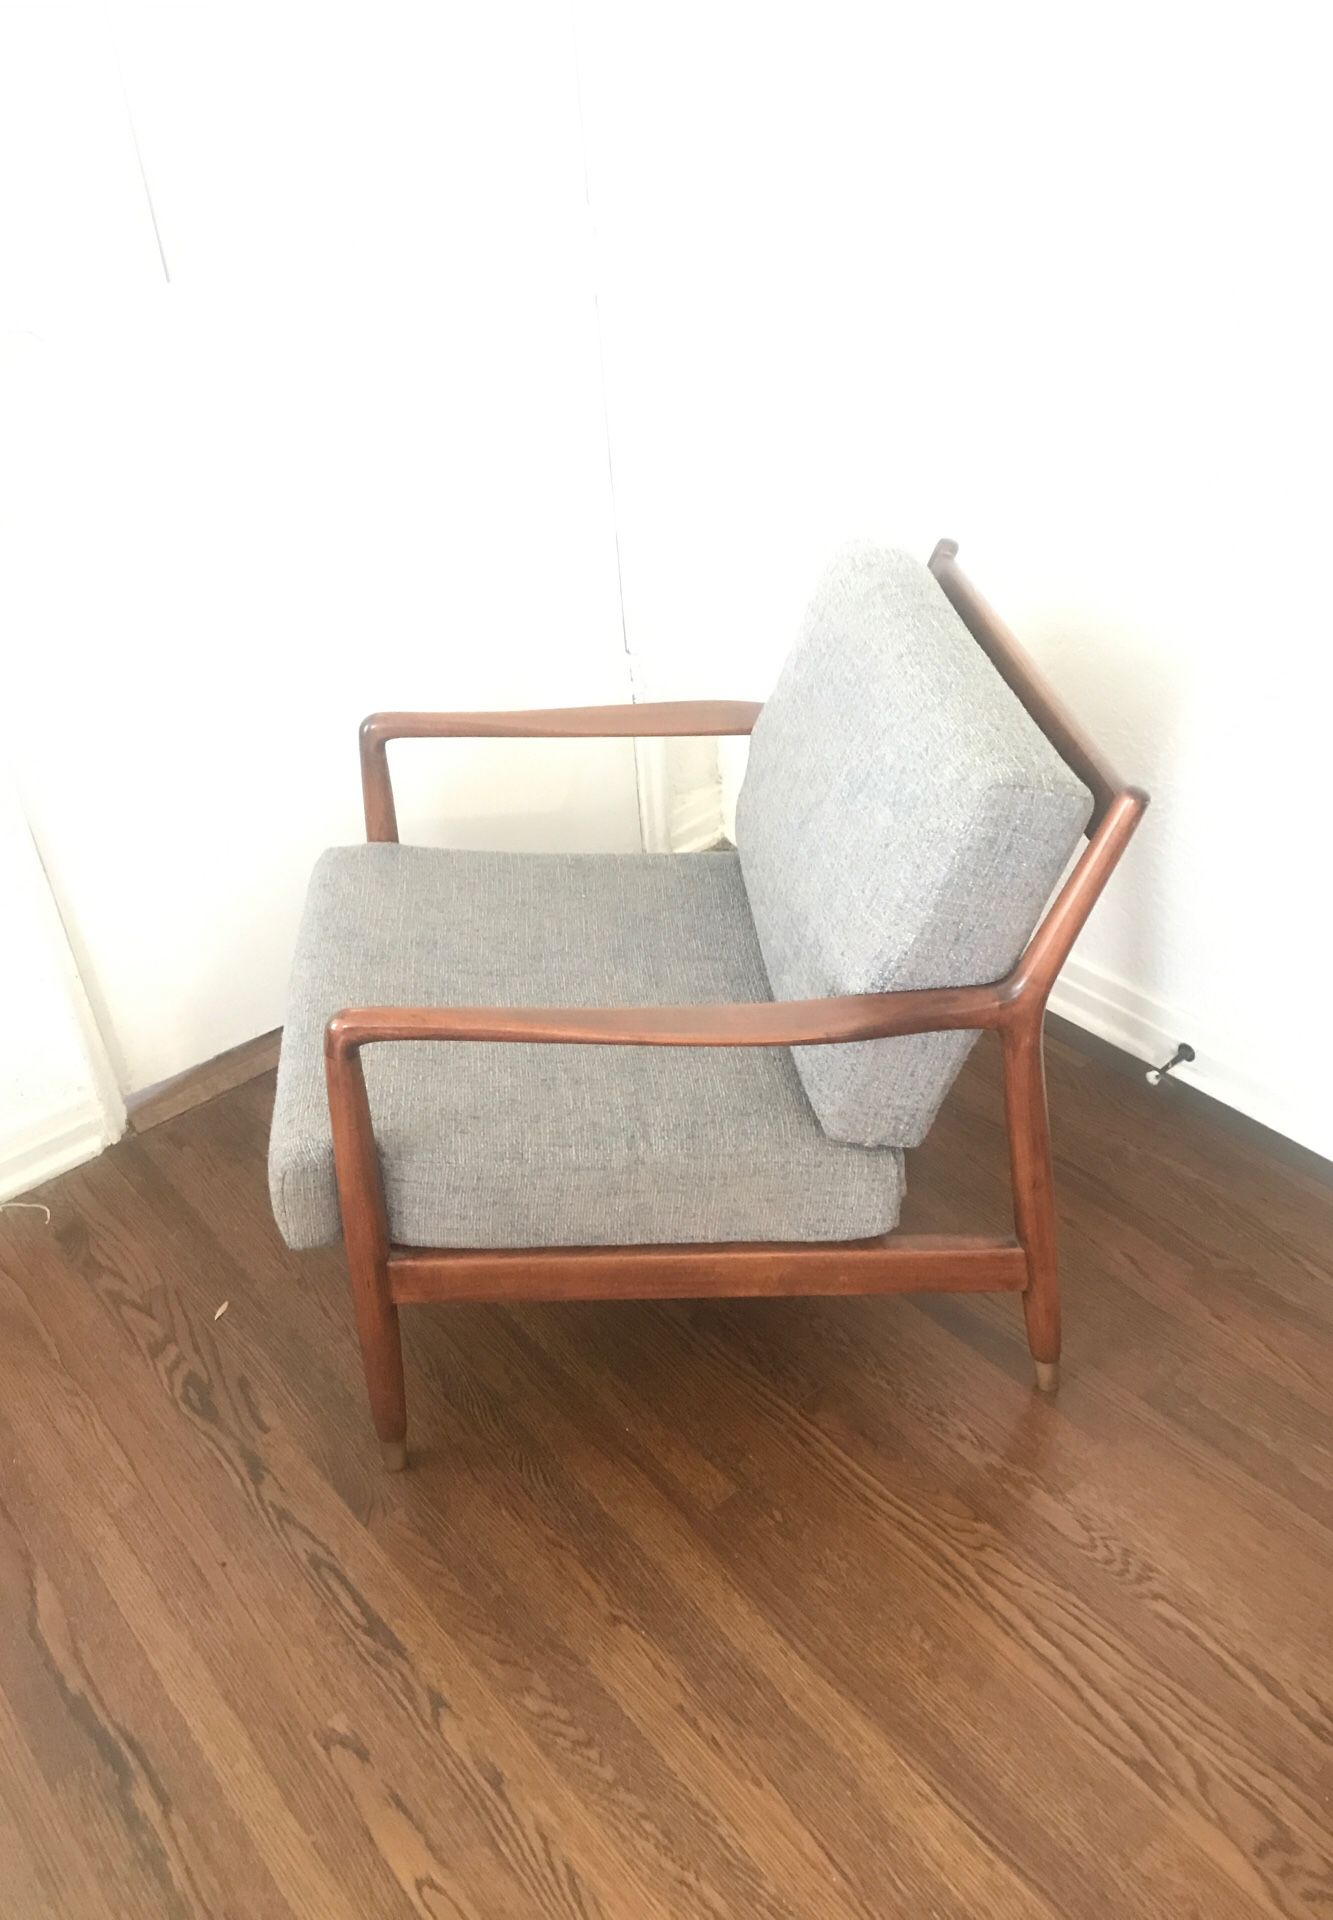 Vintage Mid century modern lounge chair in great condition